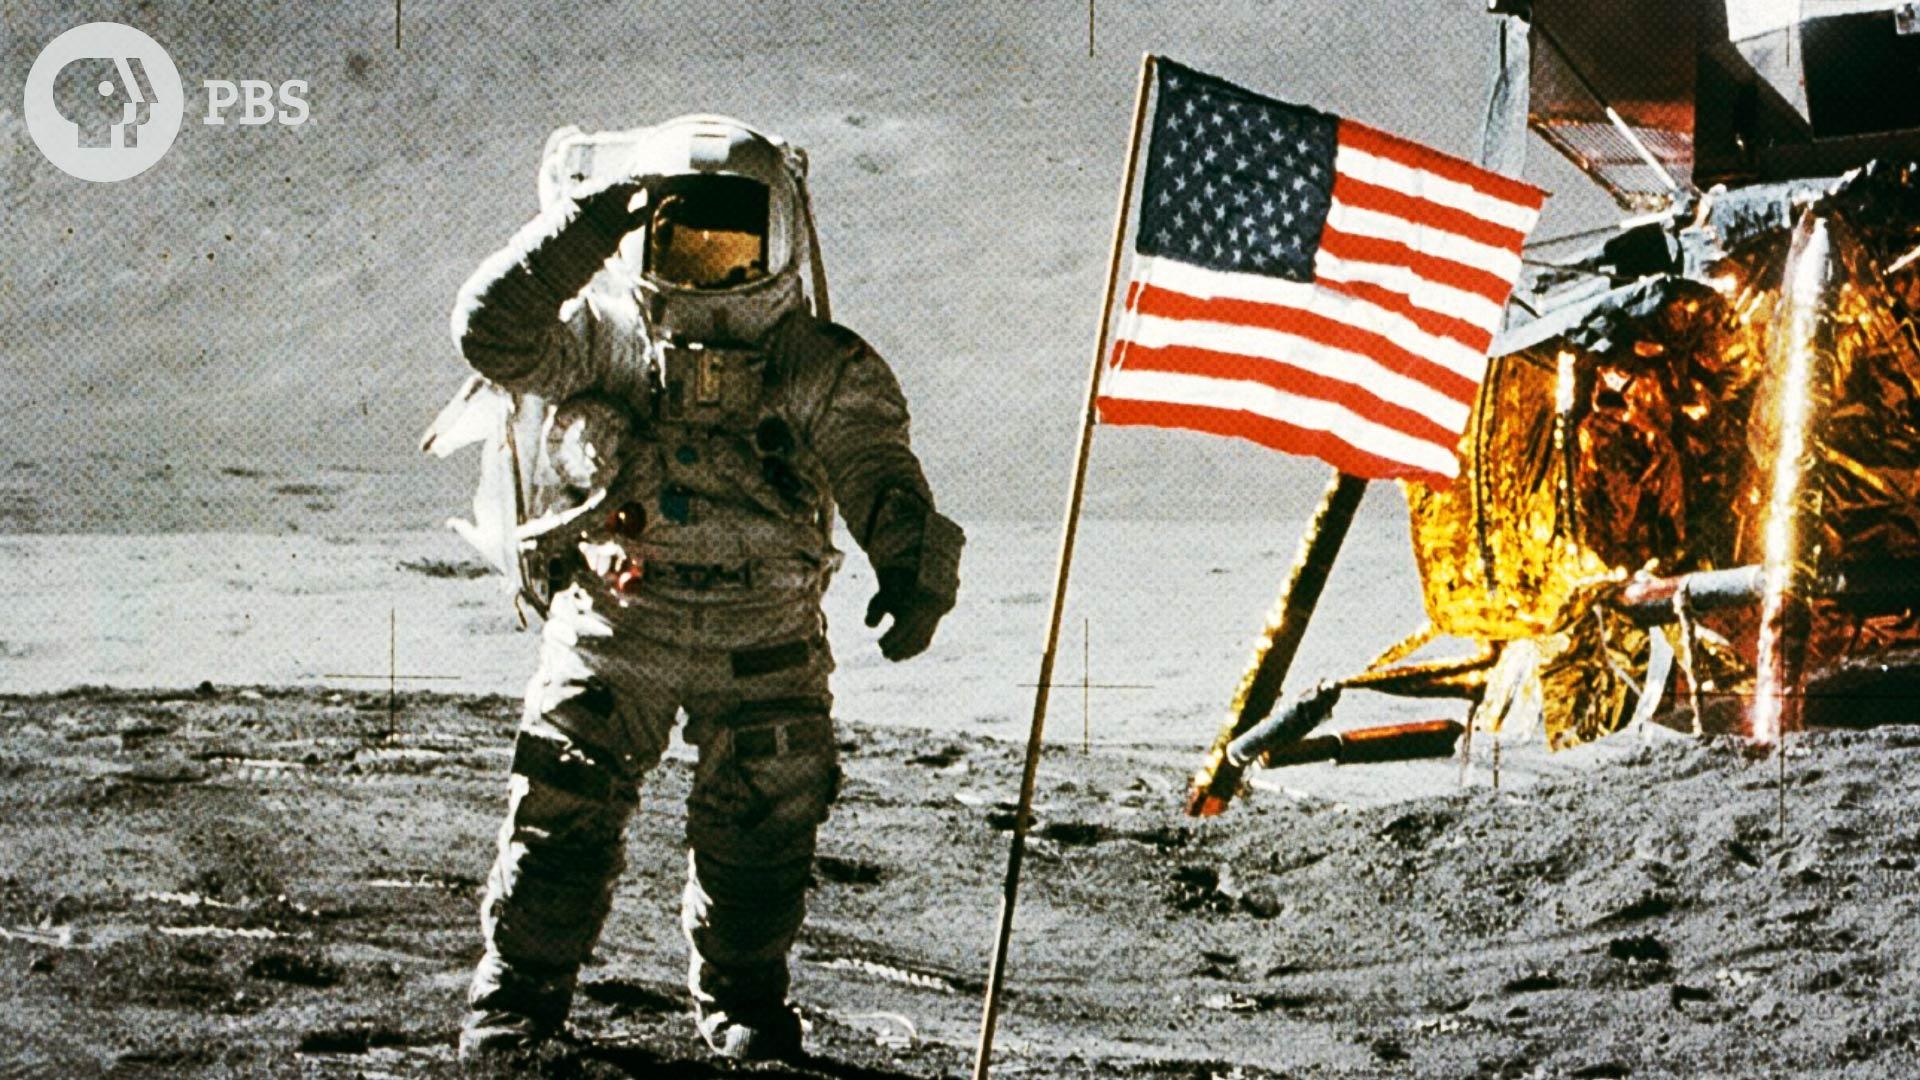 astronaut on moon by the american flag